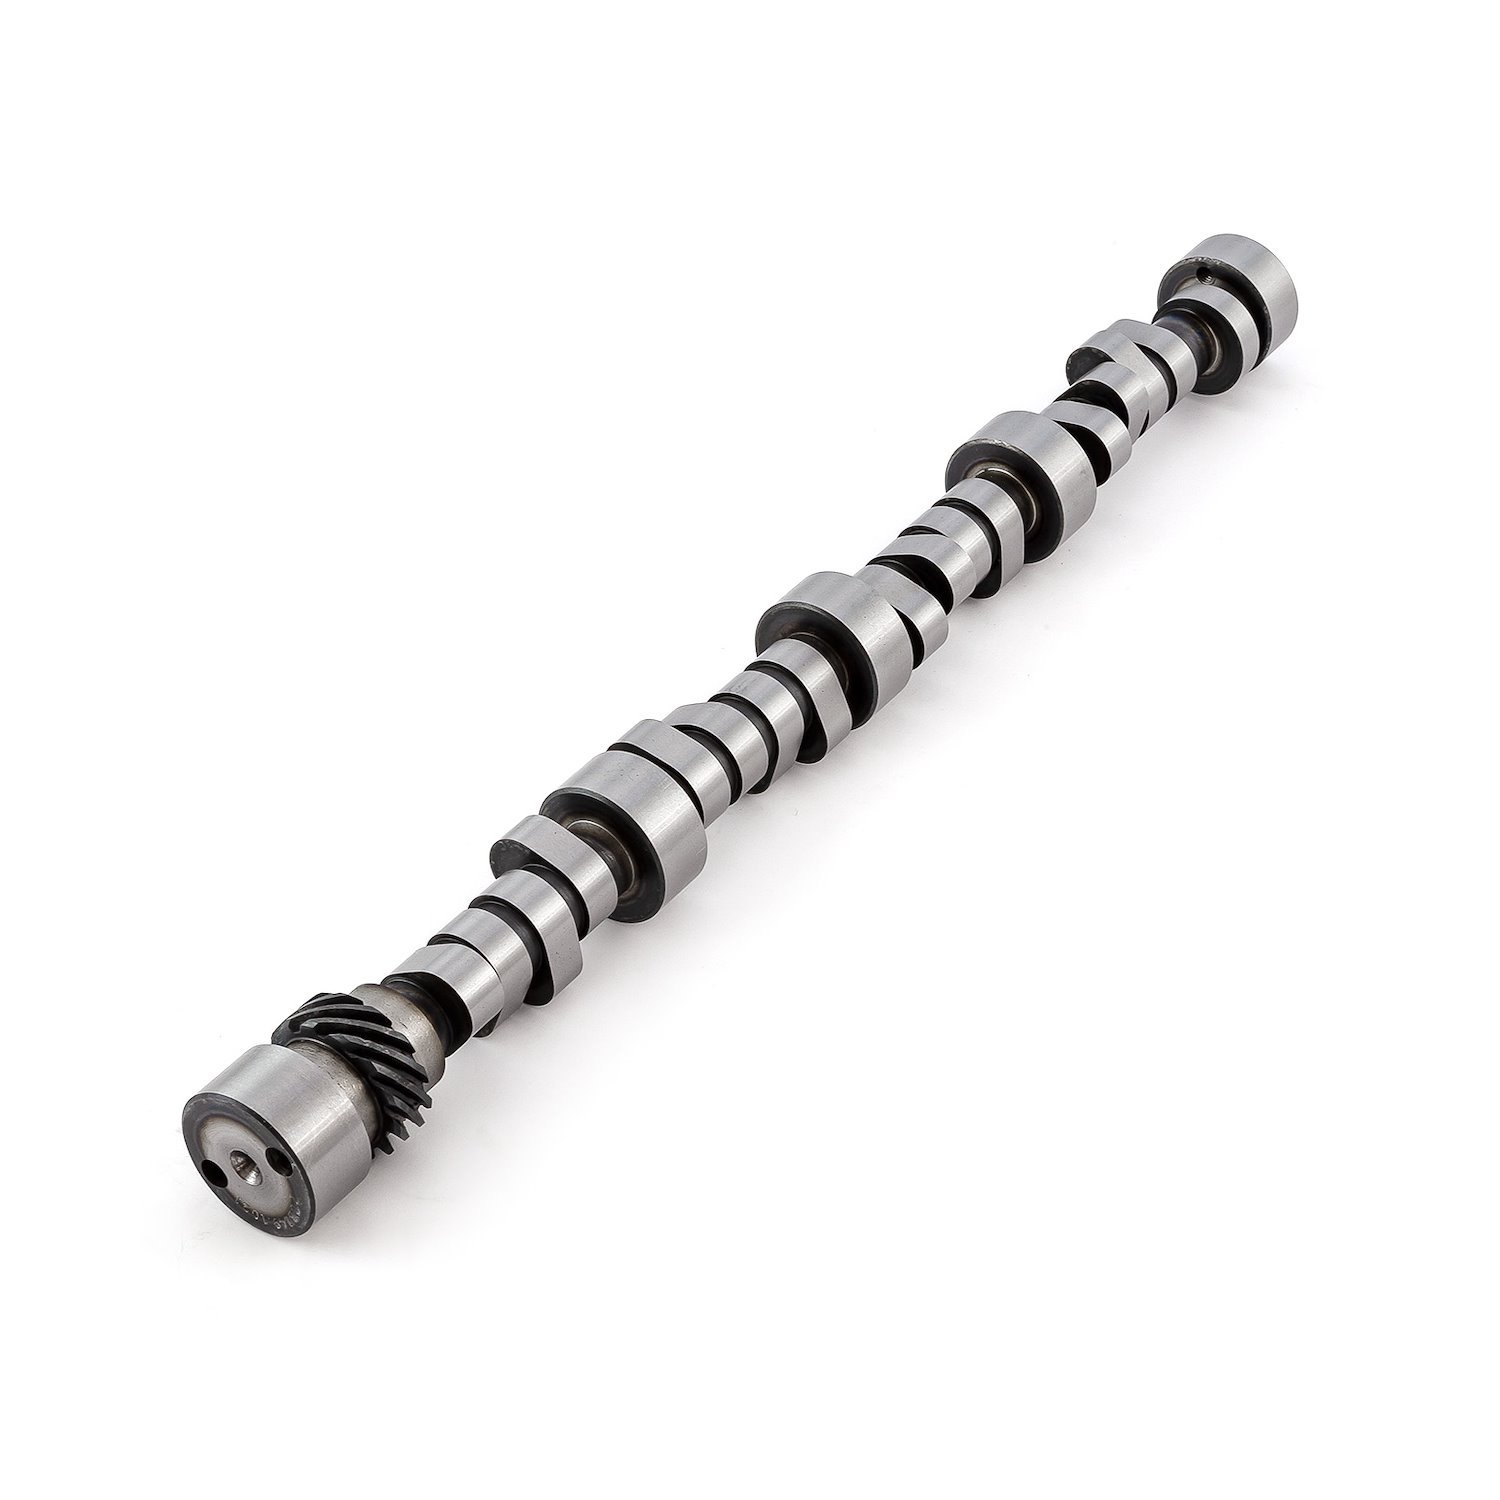 Hydraulic Roller Camshaft for Small Block Chevy 350 [288 Int. 294 Exh. Duration]